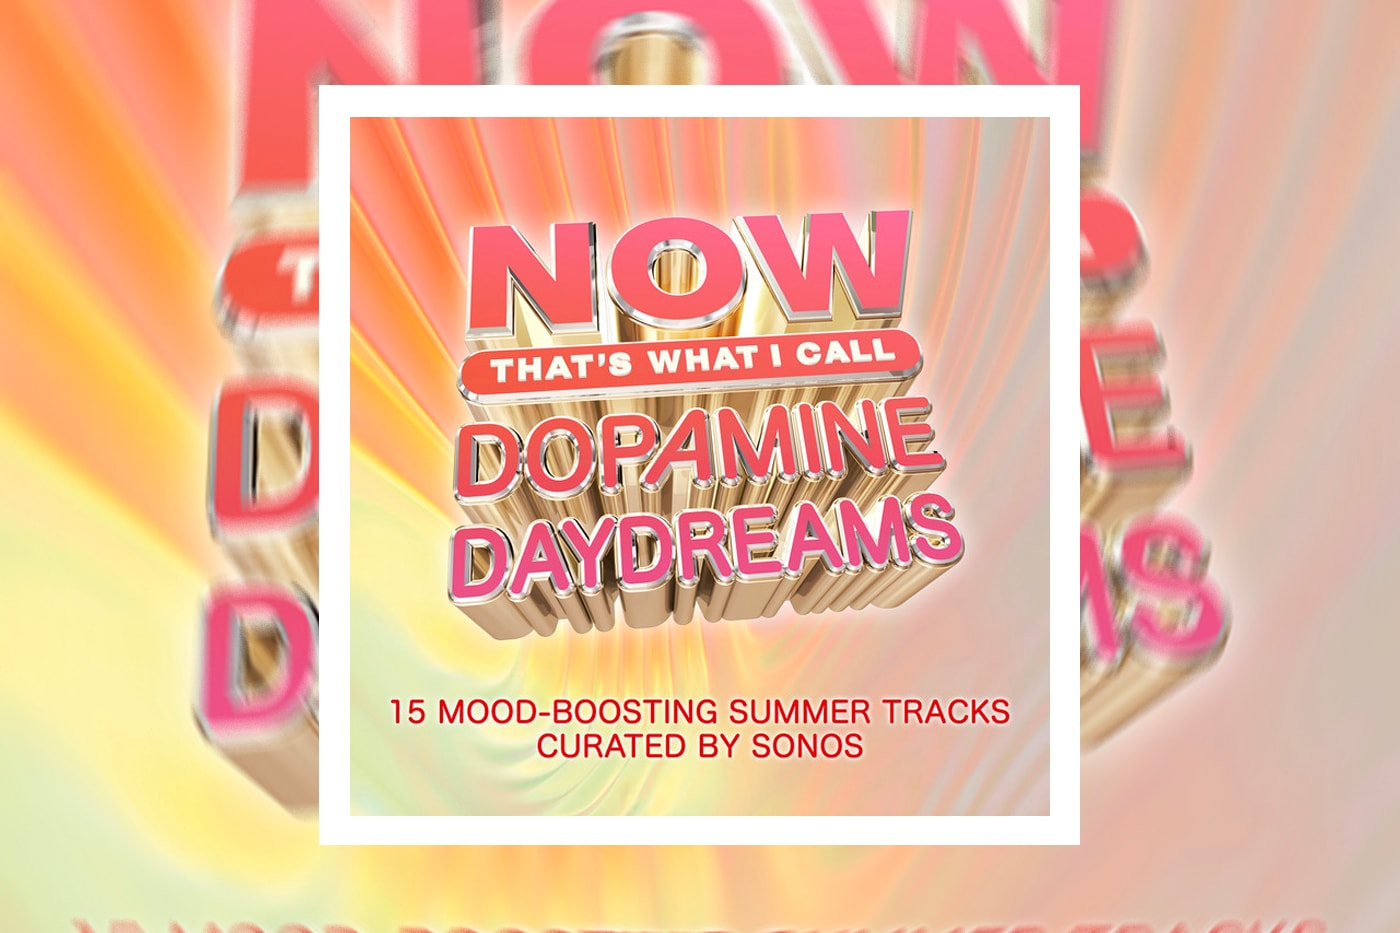 Sonos Now Curate Summertime Album NOW That’s What I Call Dopamine Daydreams 2023 Digital record LP Apple music spotify stream listen